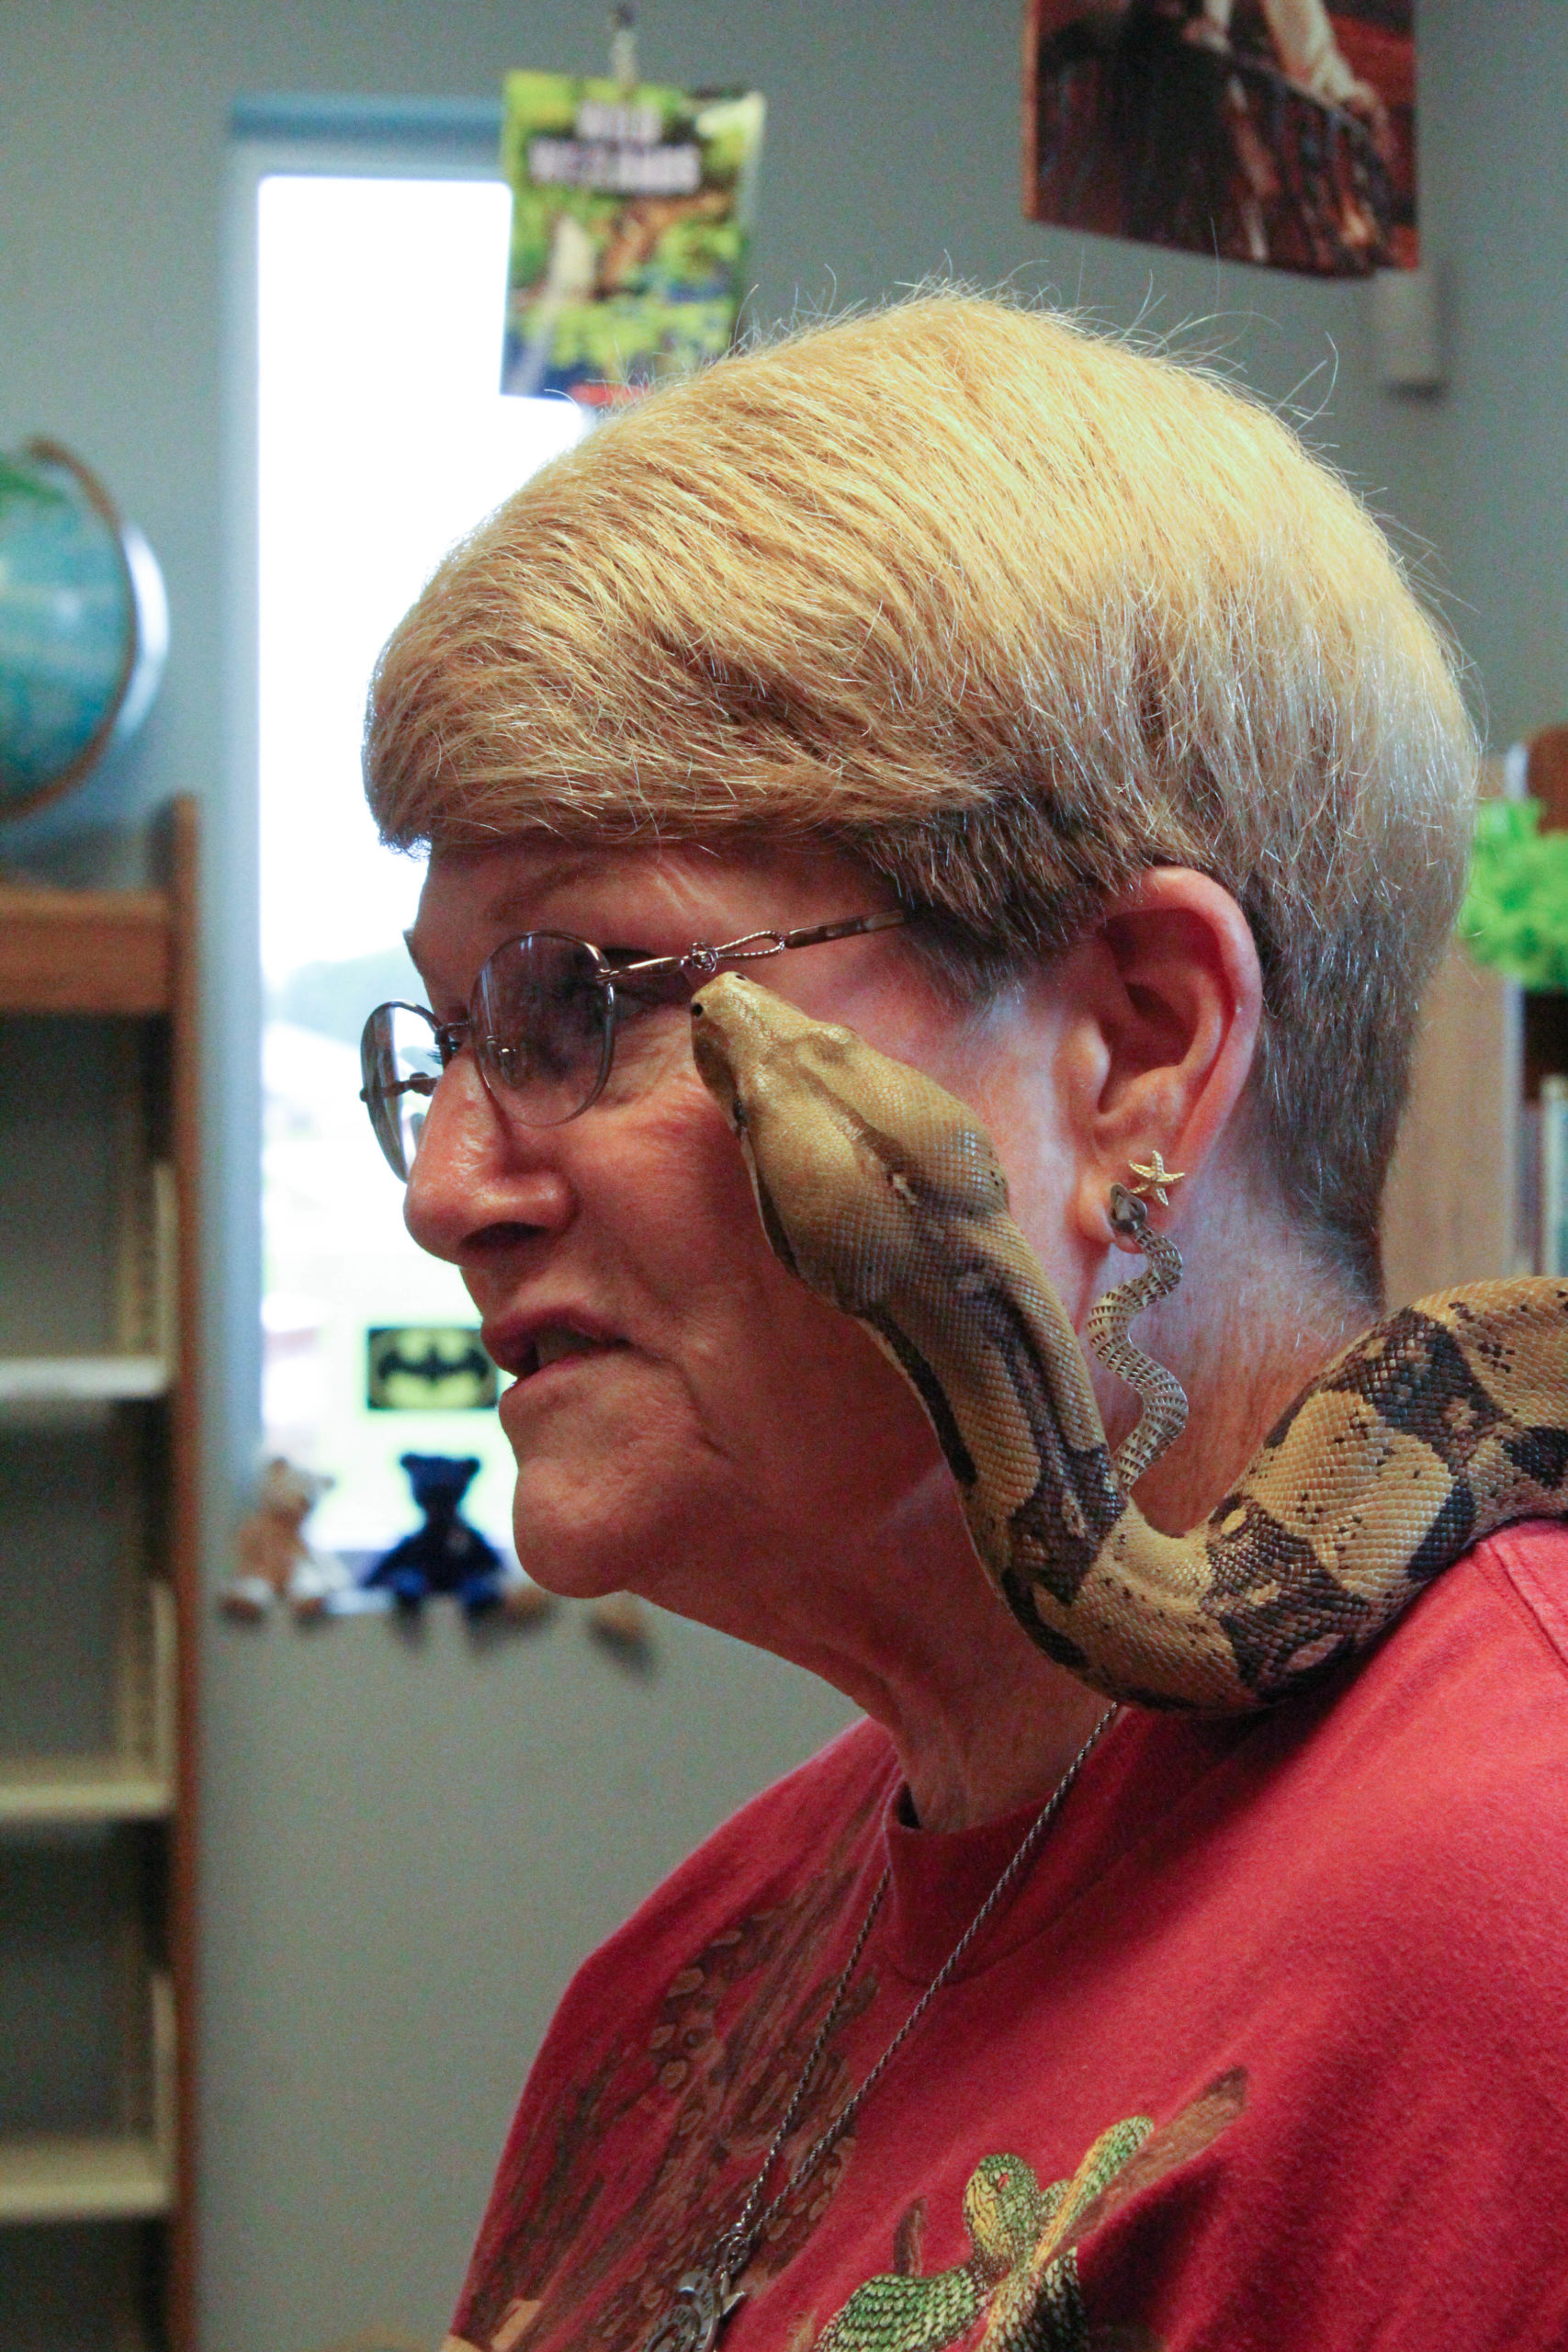 Connie "The Snake Lady" with one of her snakes